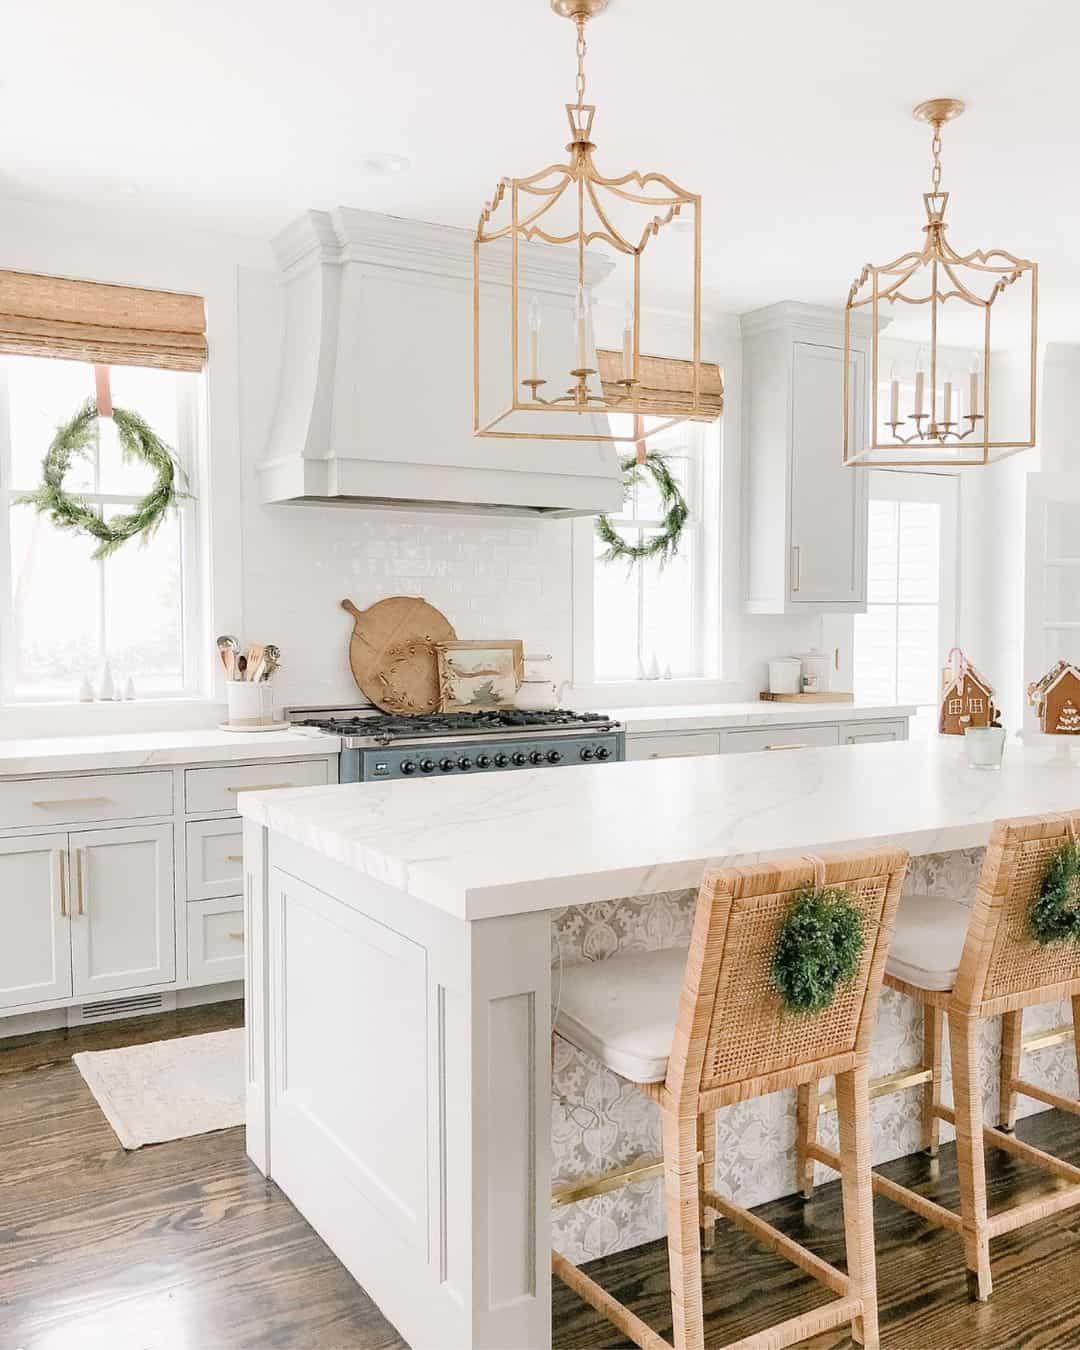 Small City Kitchen with White Cabinets and Brushed Gold Pulls